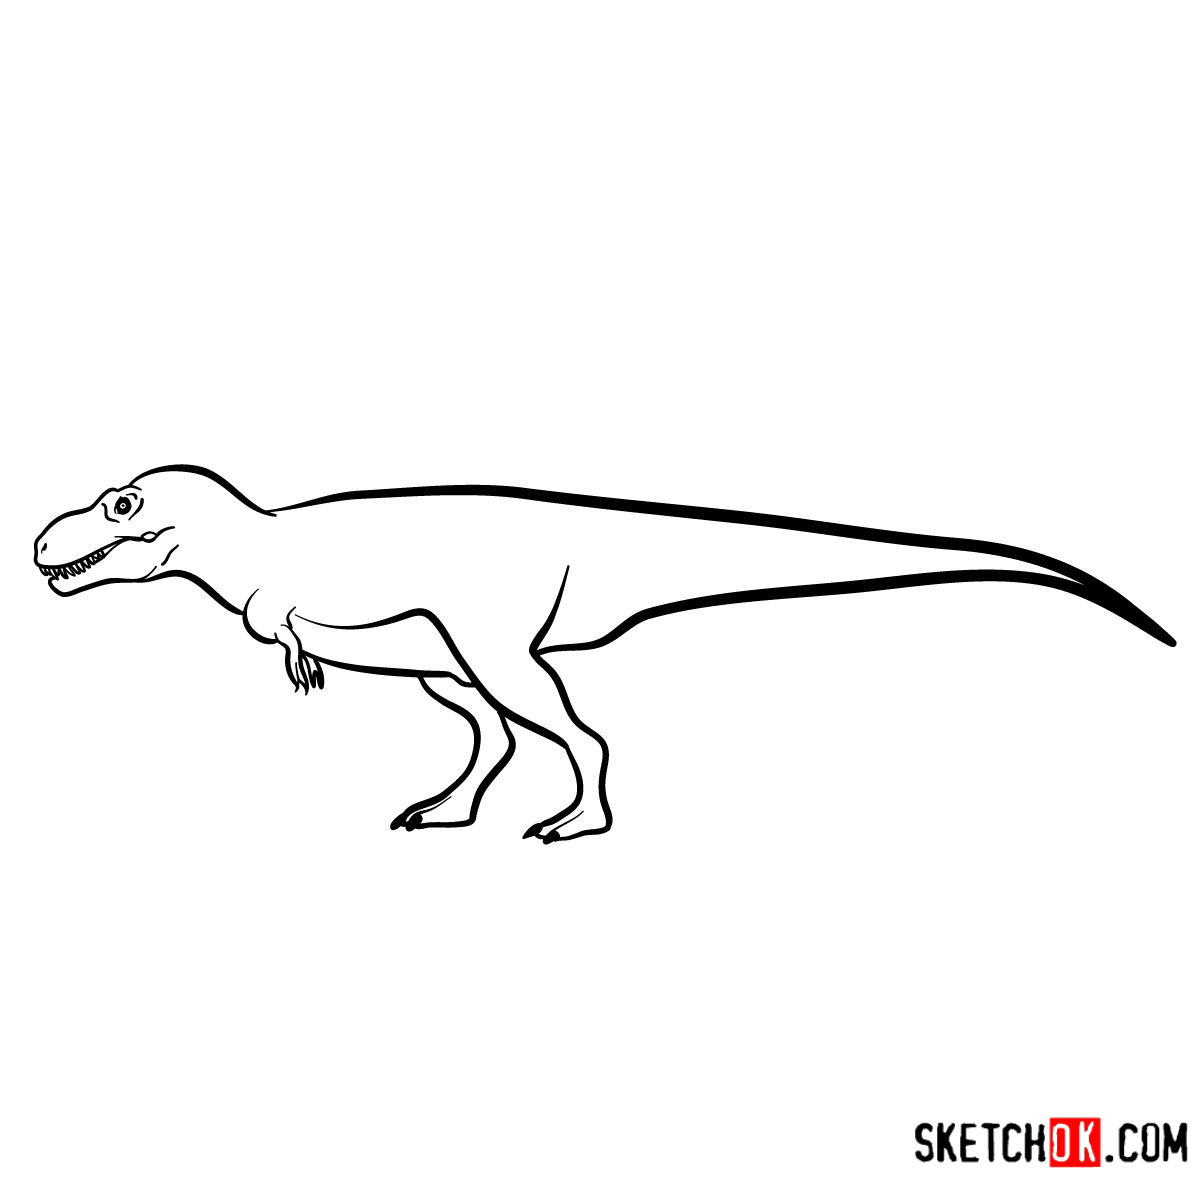 How to draw a Tarbosaurus